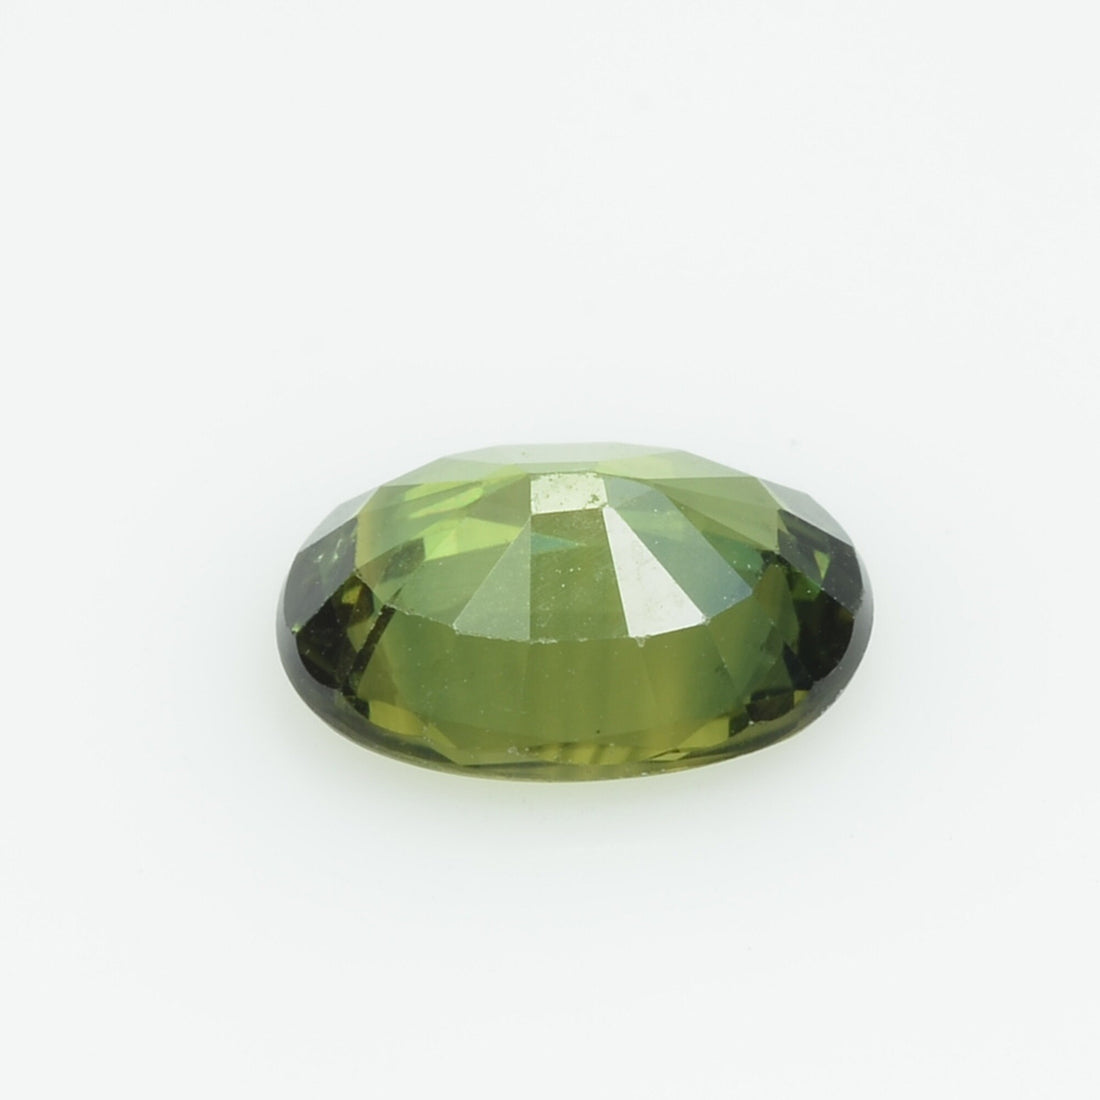 1.56 Cts Natural Green Sapphire Loose Gemstone Oval Cut